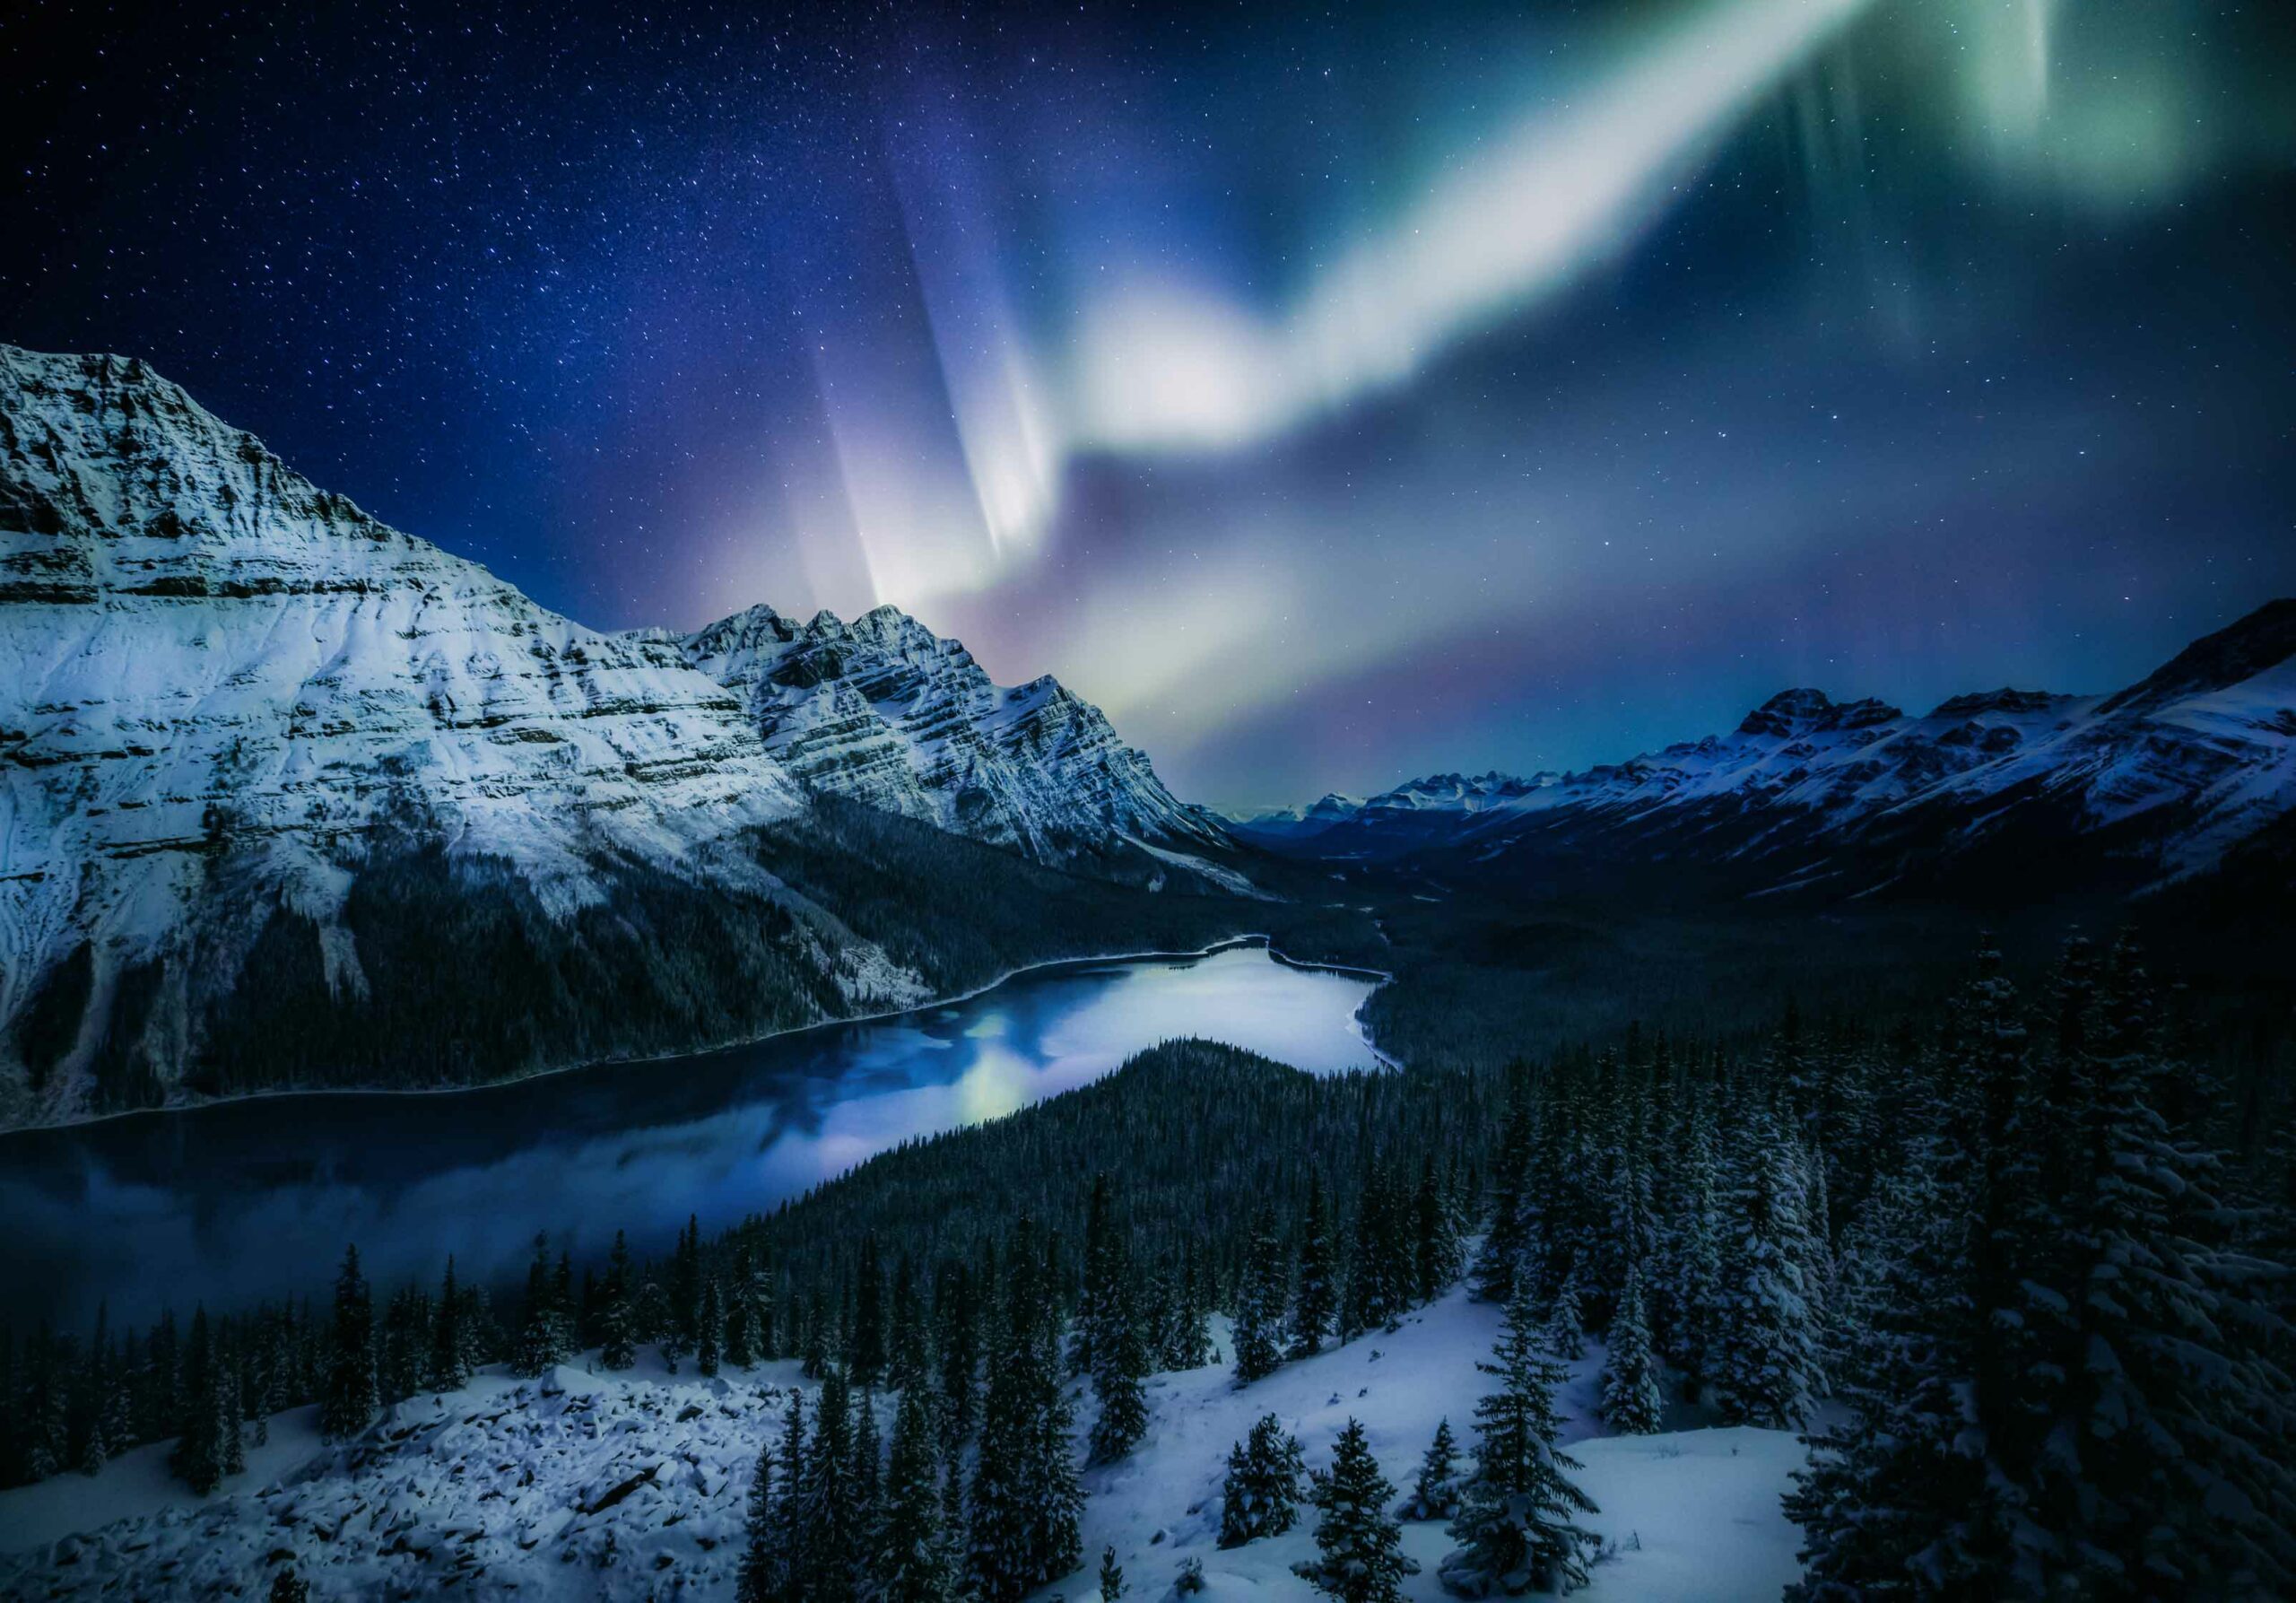 Northern lights over Peyto Lake in the winter